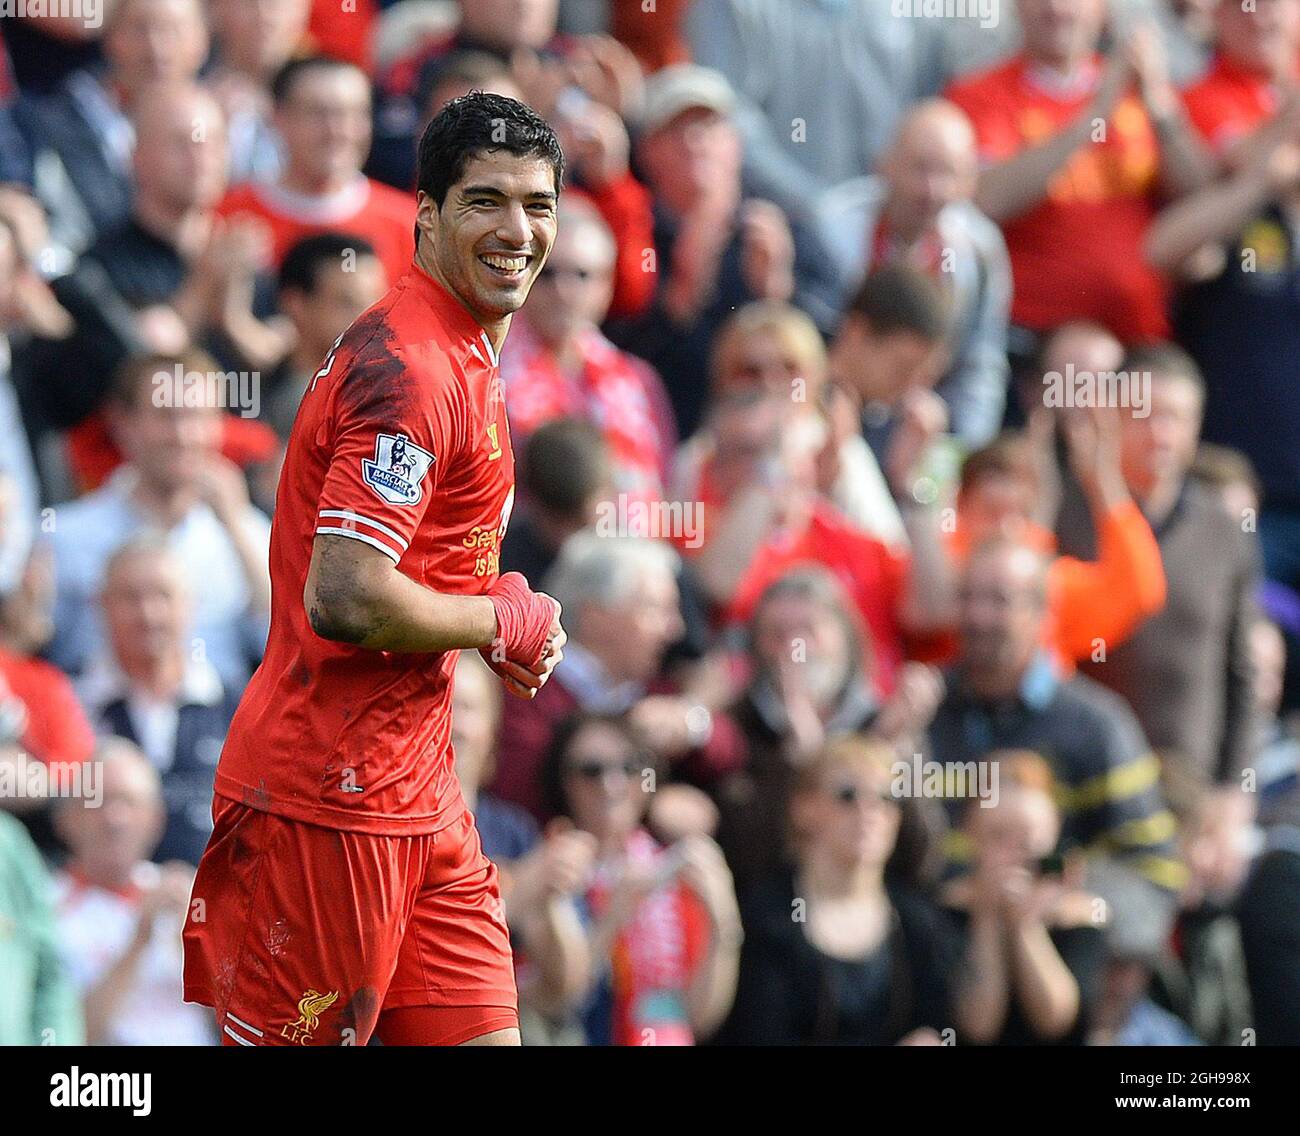 Luis Suarez of Liverpool celebrates scoring the second goal during the Barclays Premier League match between Liverpool and Tottenham at the Anfield Stadium in Liverpool, England on March 30, 2014. Stock Photo